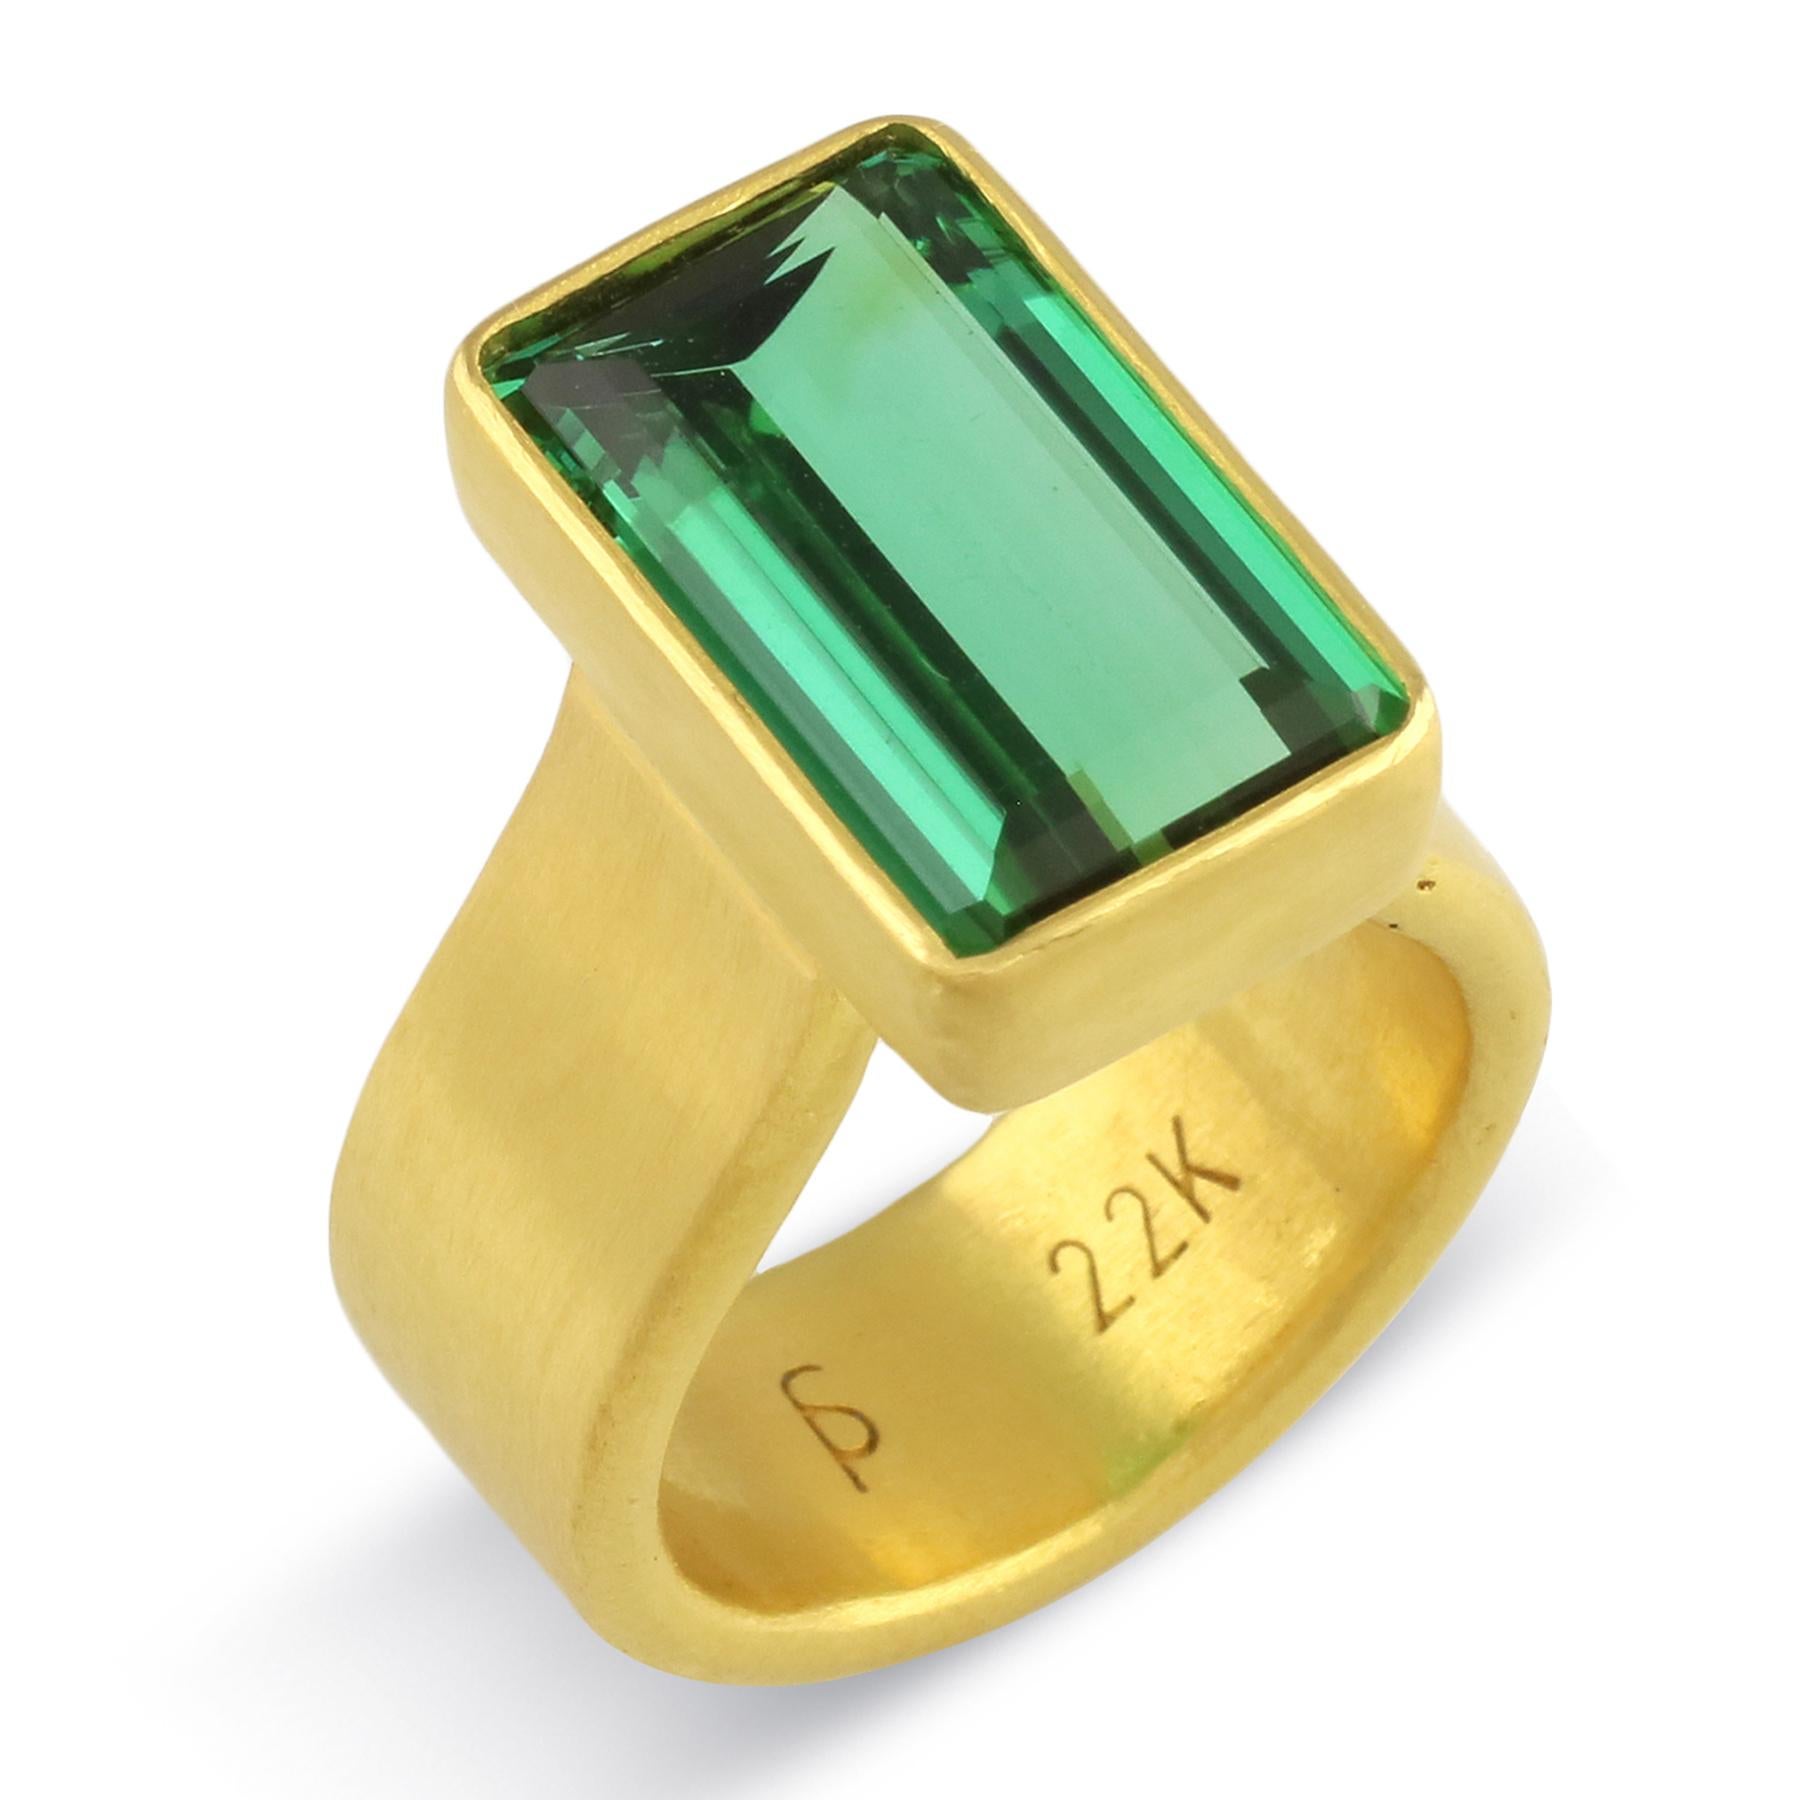 Artisan PHILIPPE SPENCER 8.4 Ct. Extra-Fine Tourmaline Statement Ring in 22K Gold For Sale